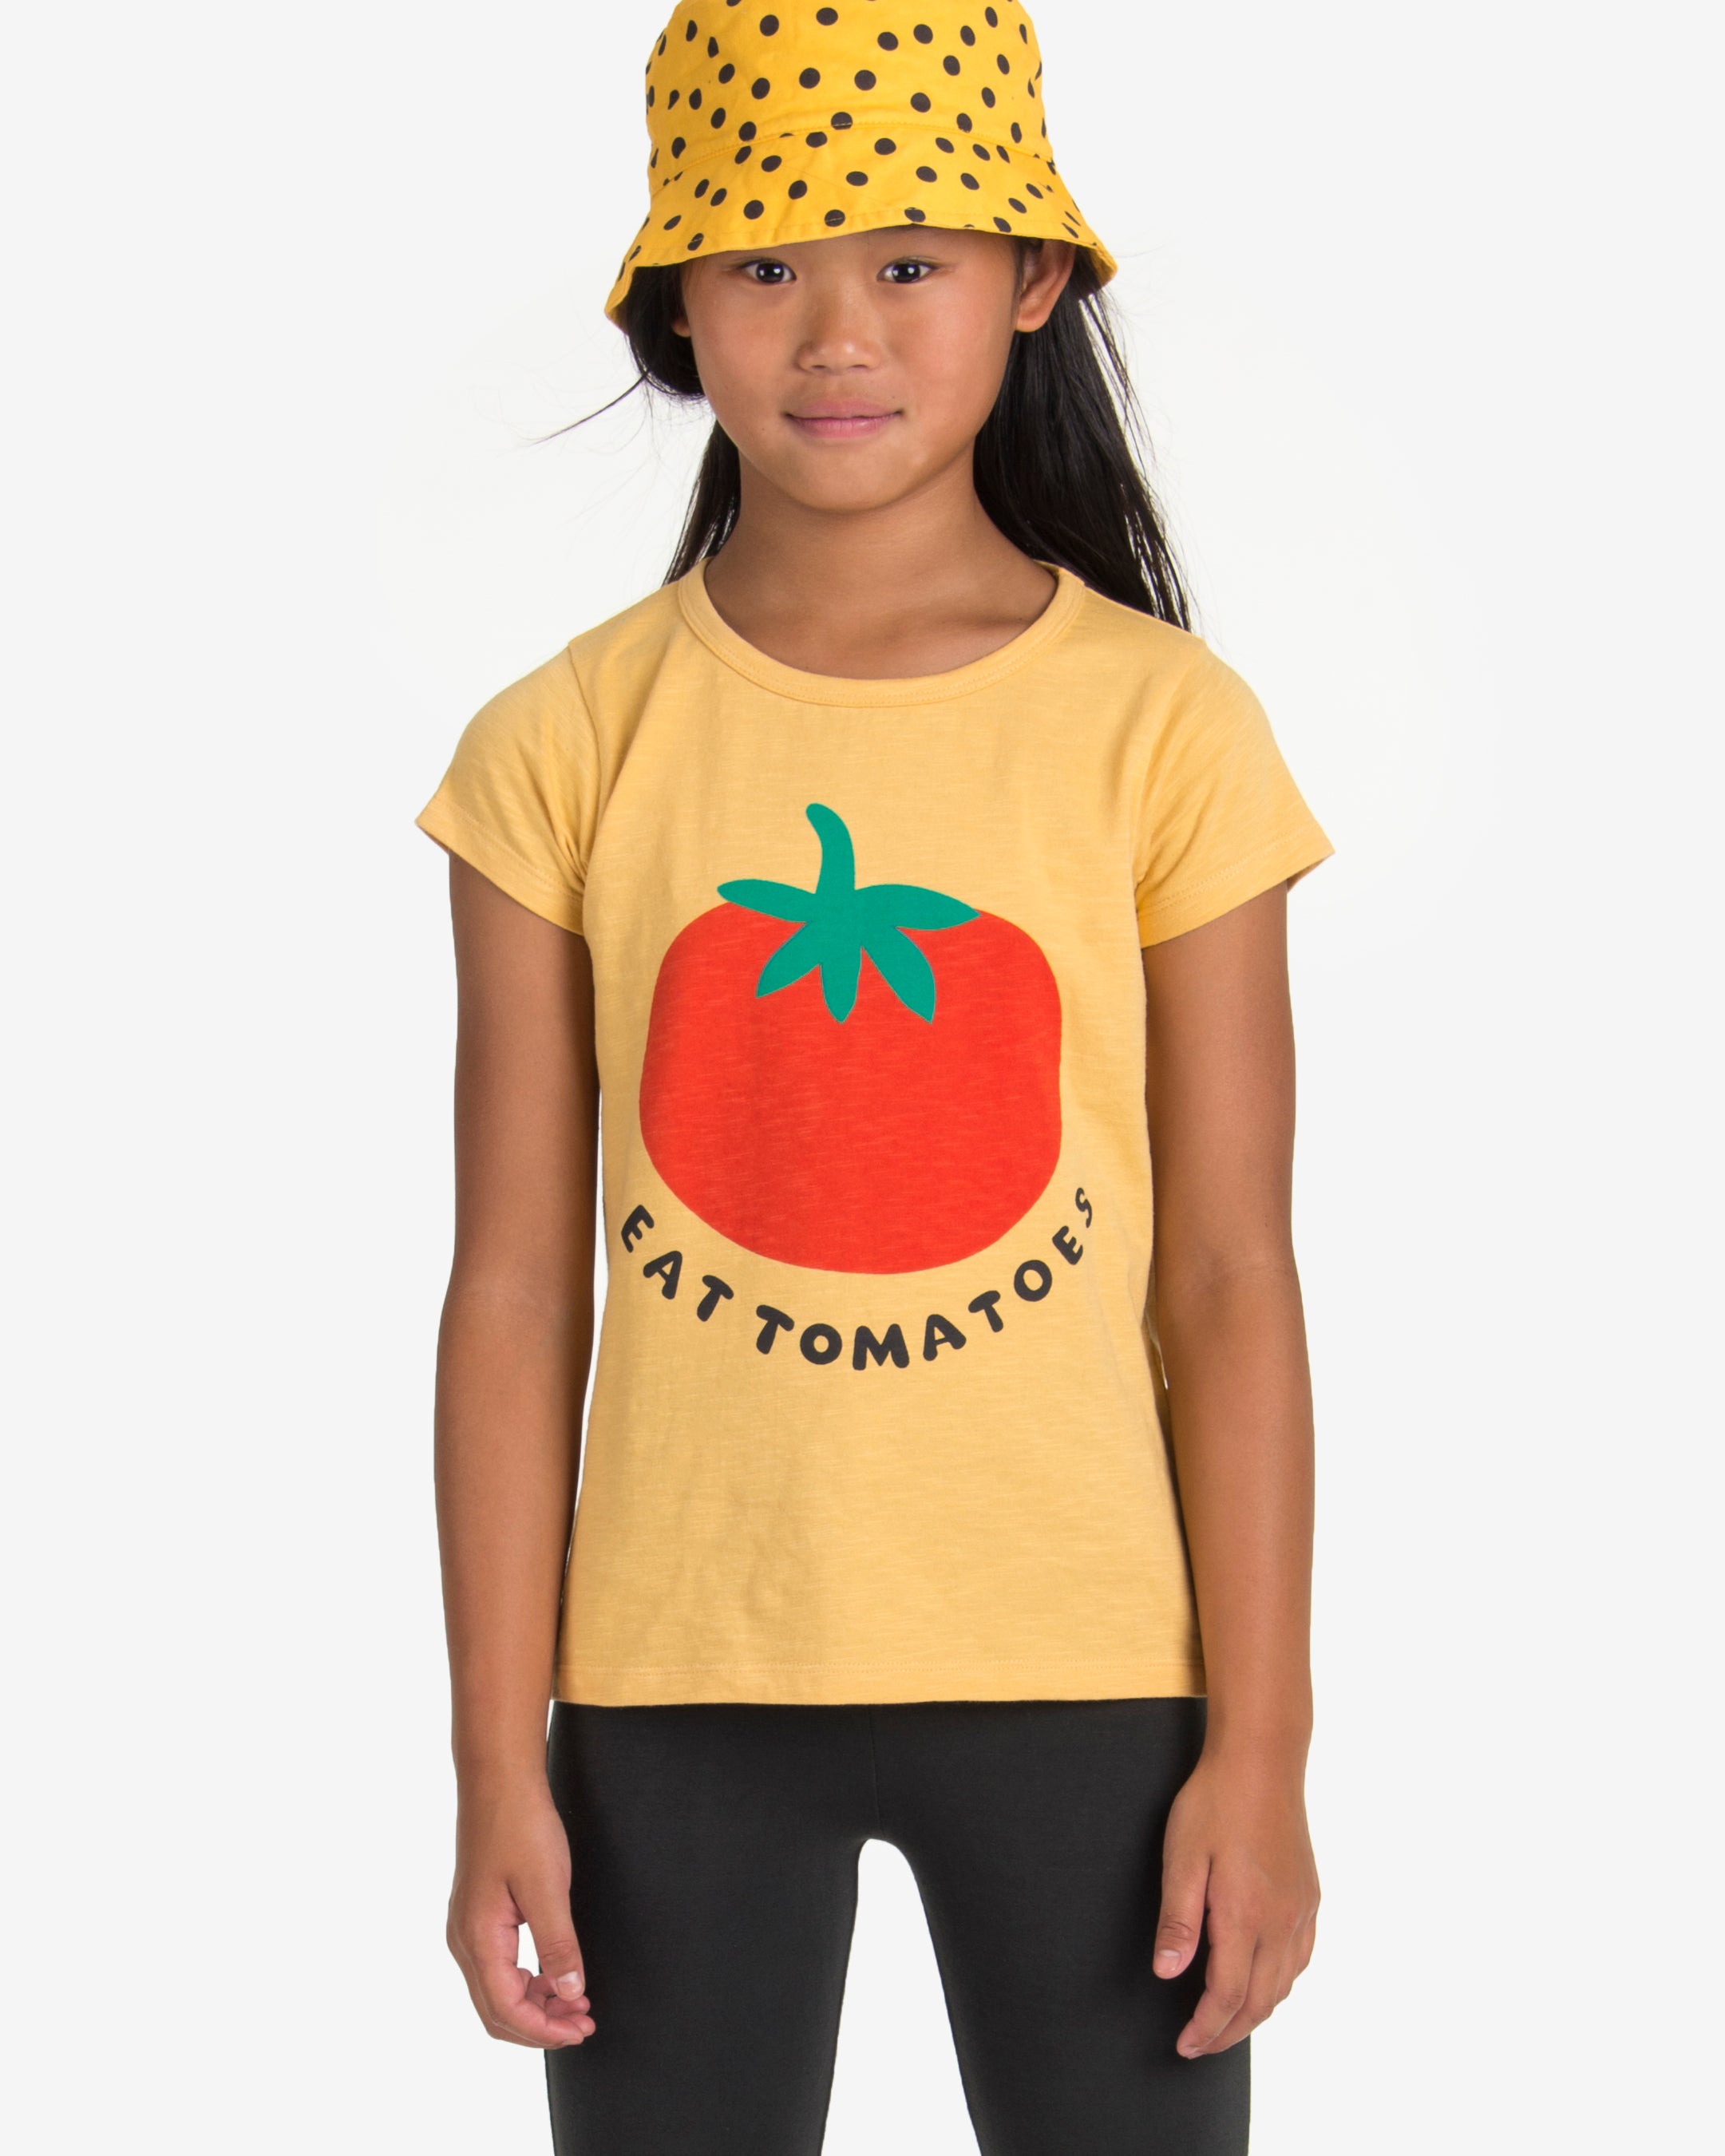 Yellow t-shirt with a big tomato print at the front. The phrase "EAT TOMATOES" is written in capital letters under the tomato print. Made by Nadadelazos